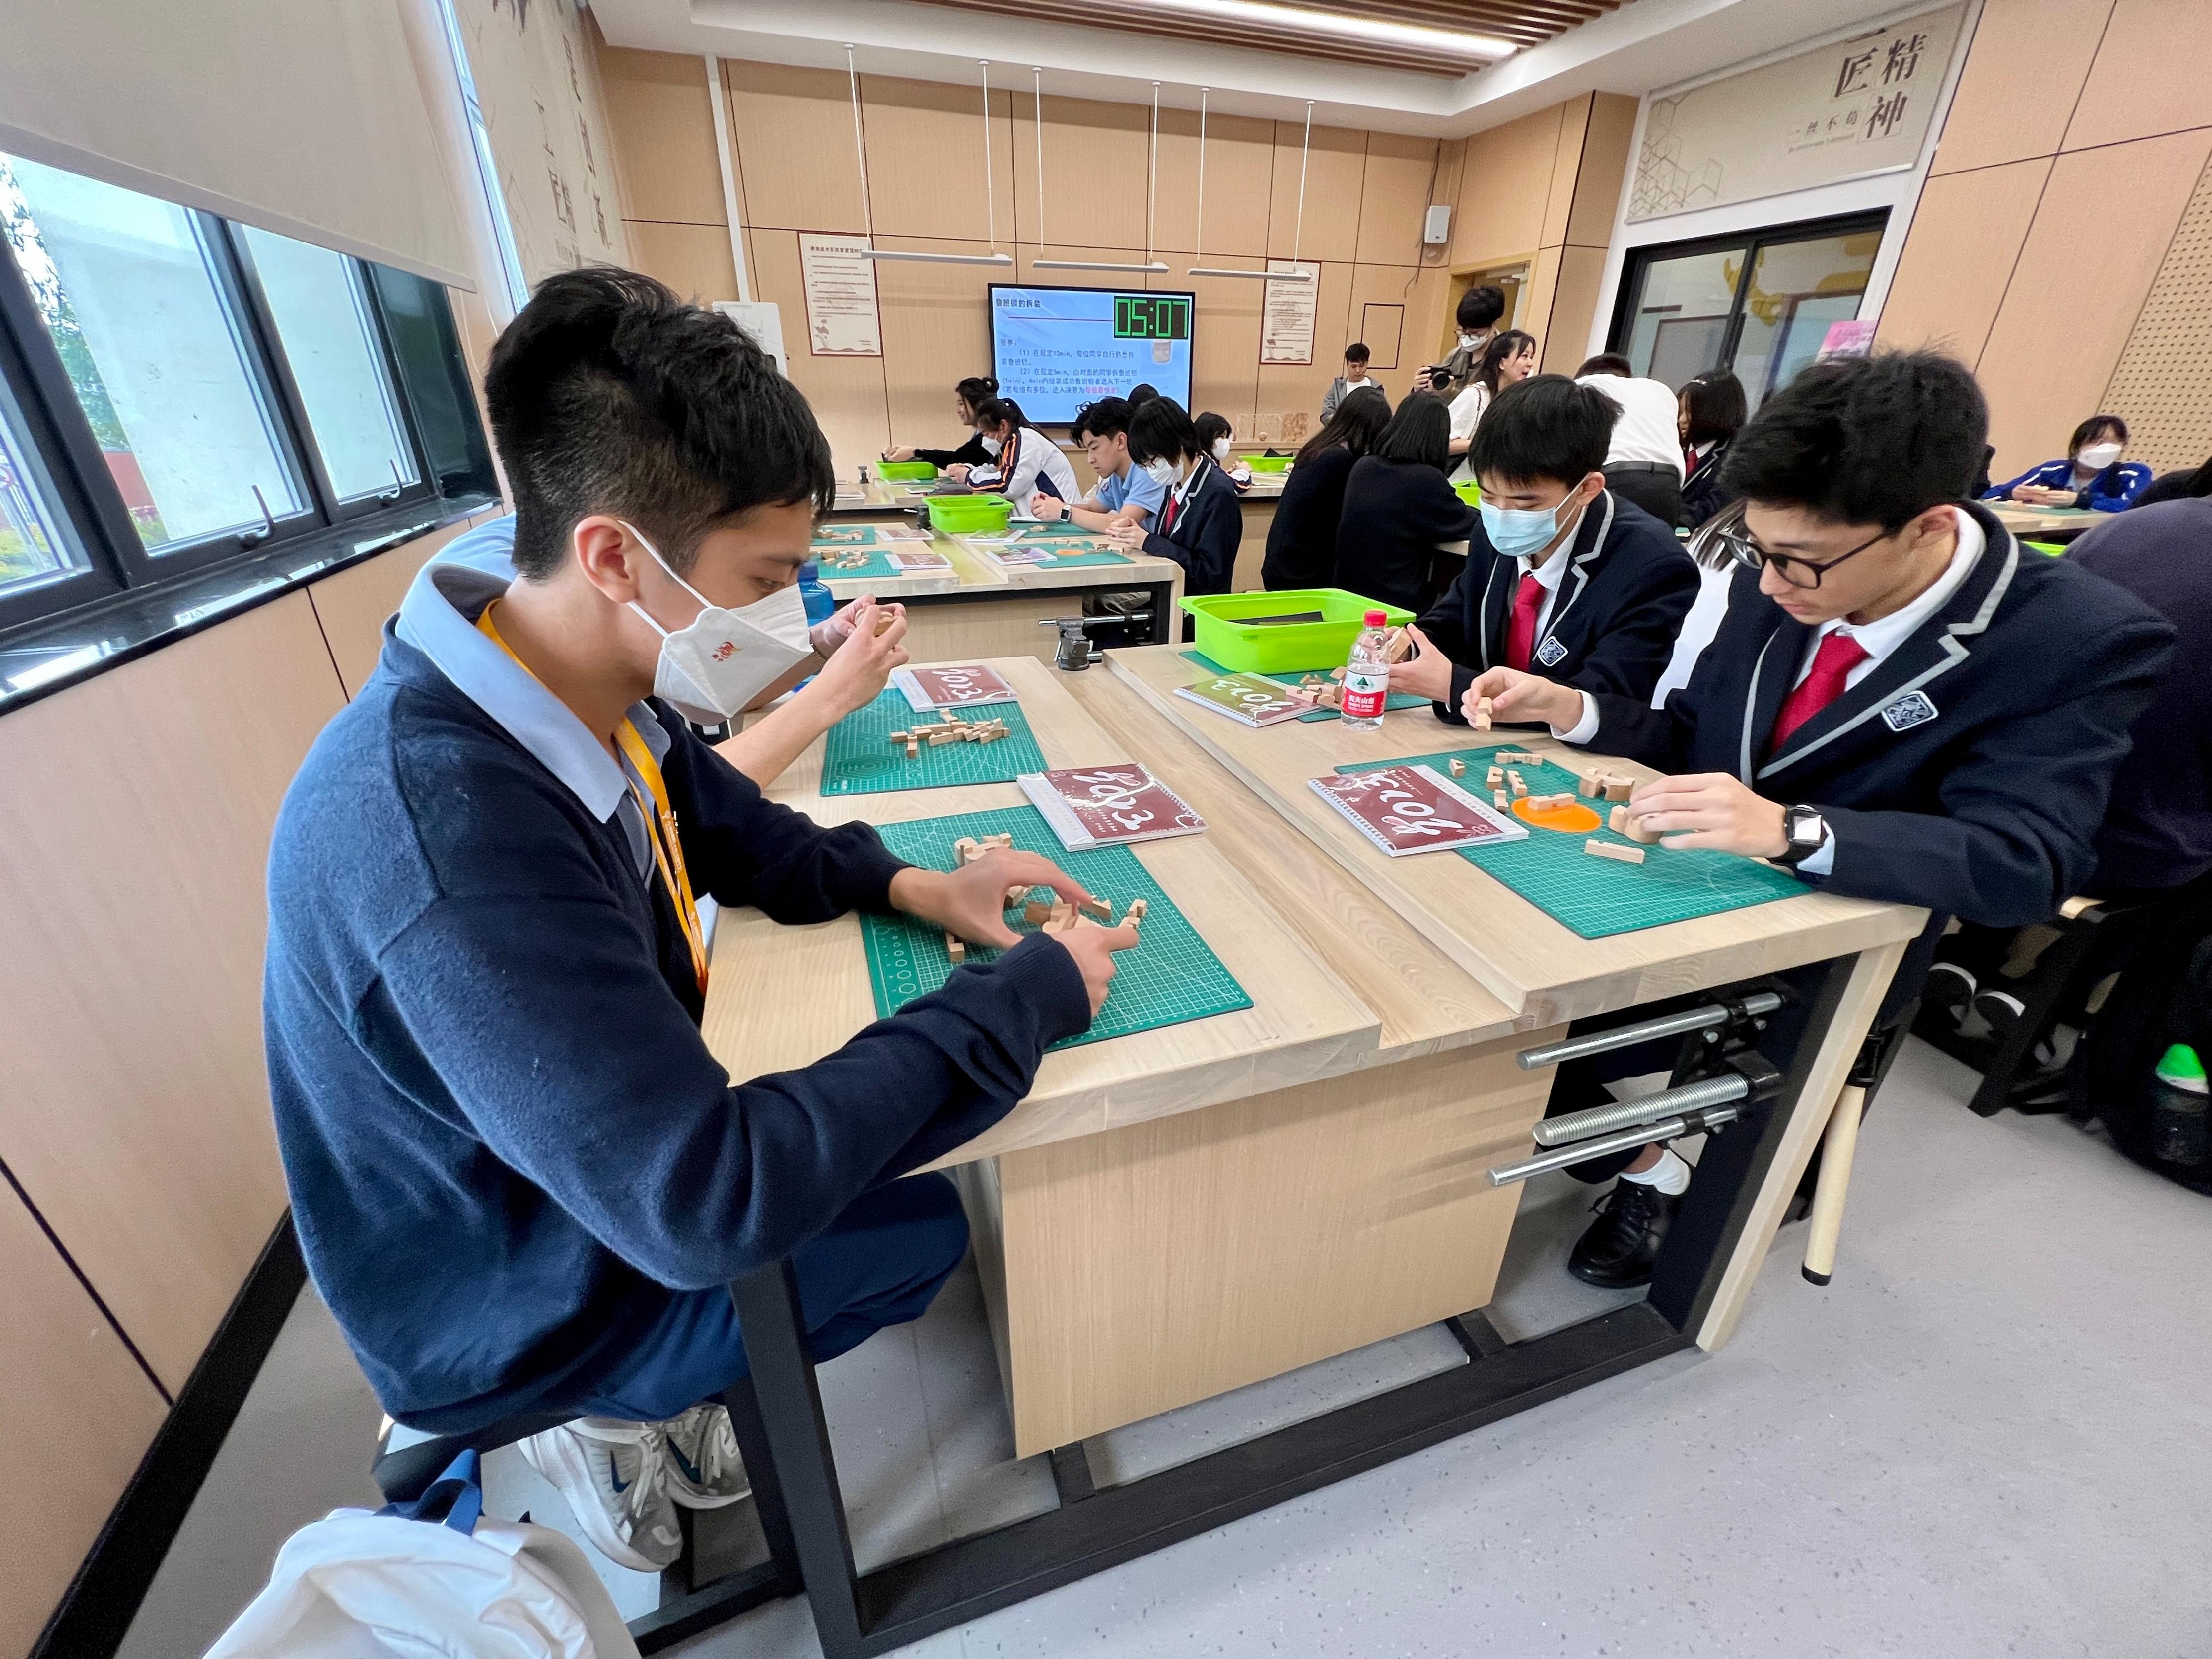 The delegation of the first Mainland study tour for students of the senior secondary subject of Citizenship and Social Development visited Guangzhou ZhiXin High School today (April 3). Photo shows members of the delegation joining students of ZhiXin High School in a woodwork class.